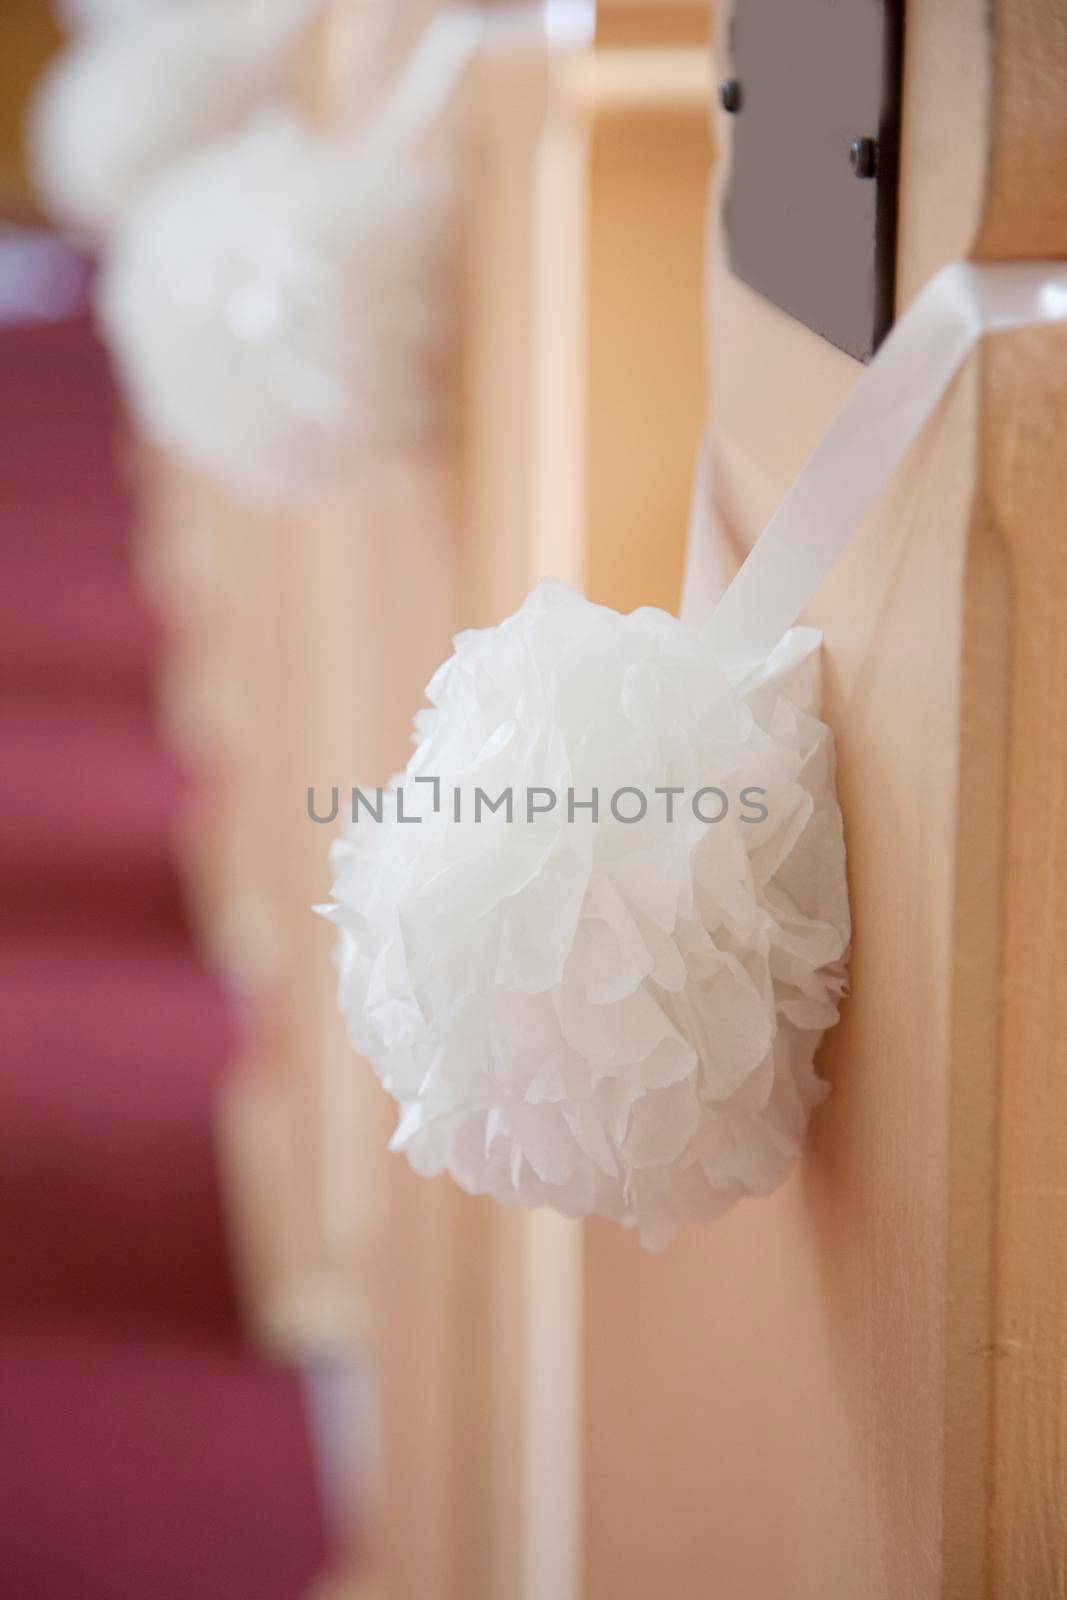 Wedding decoration in a church with a white hanging ball of flowers hung by a ribbon and blank pew plaque